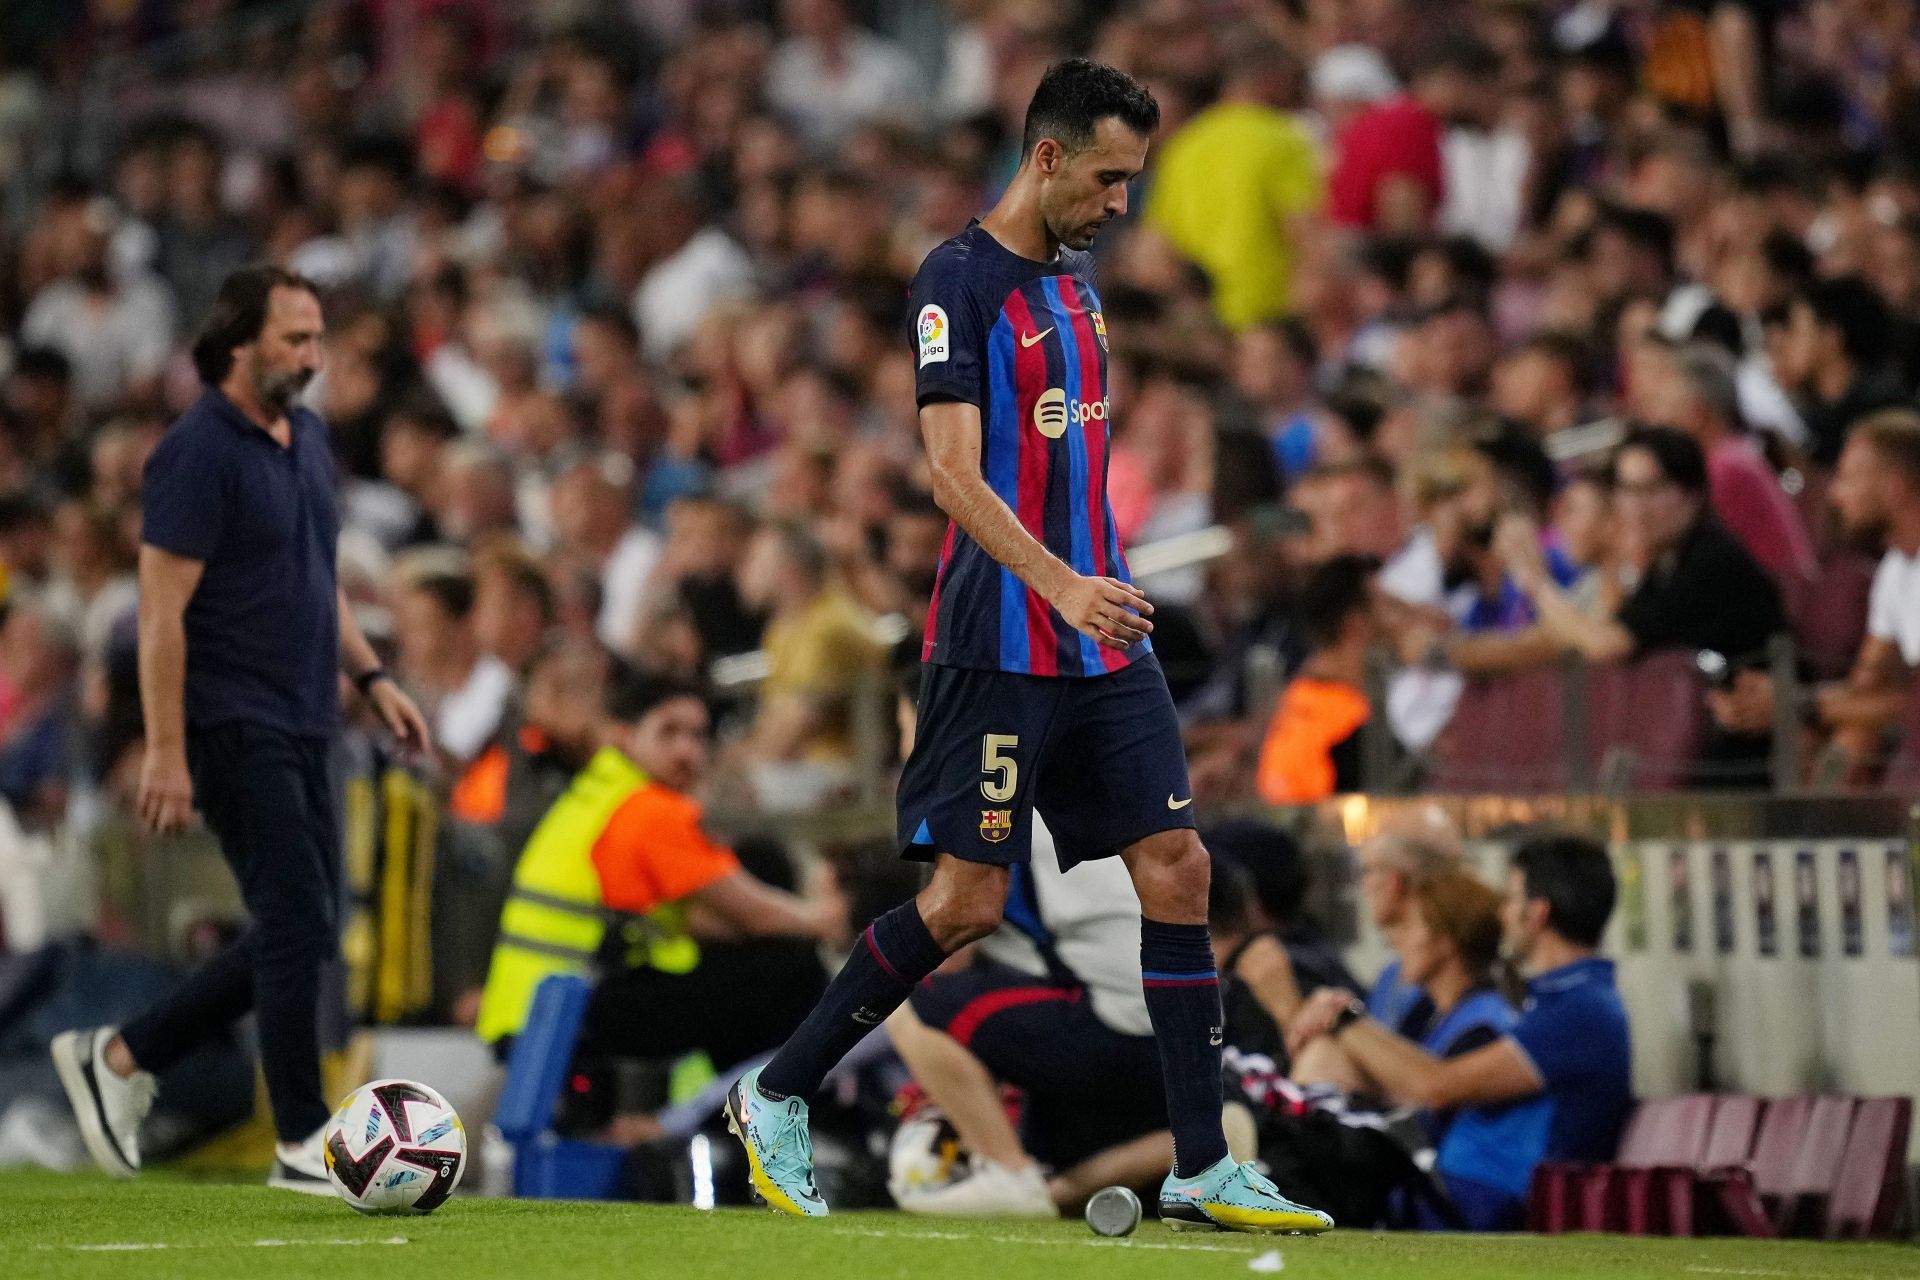 Barcelona play out goalless draw with Rayo Vallecano